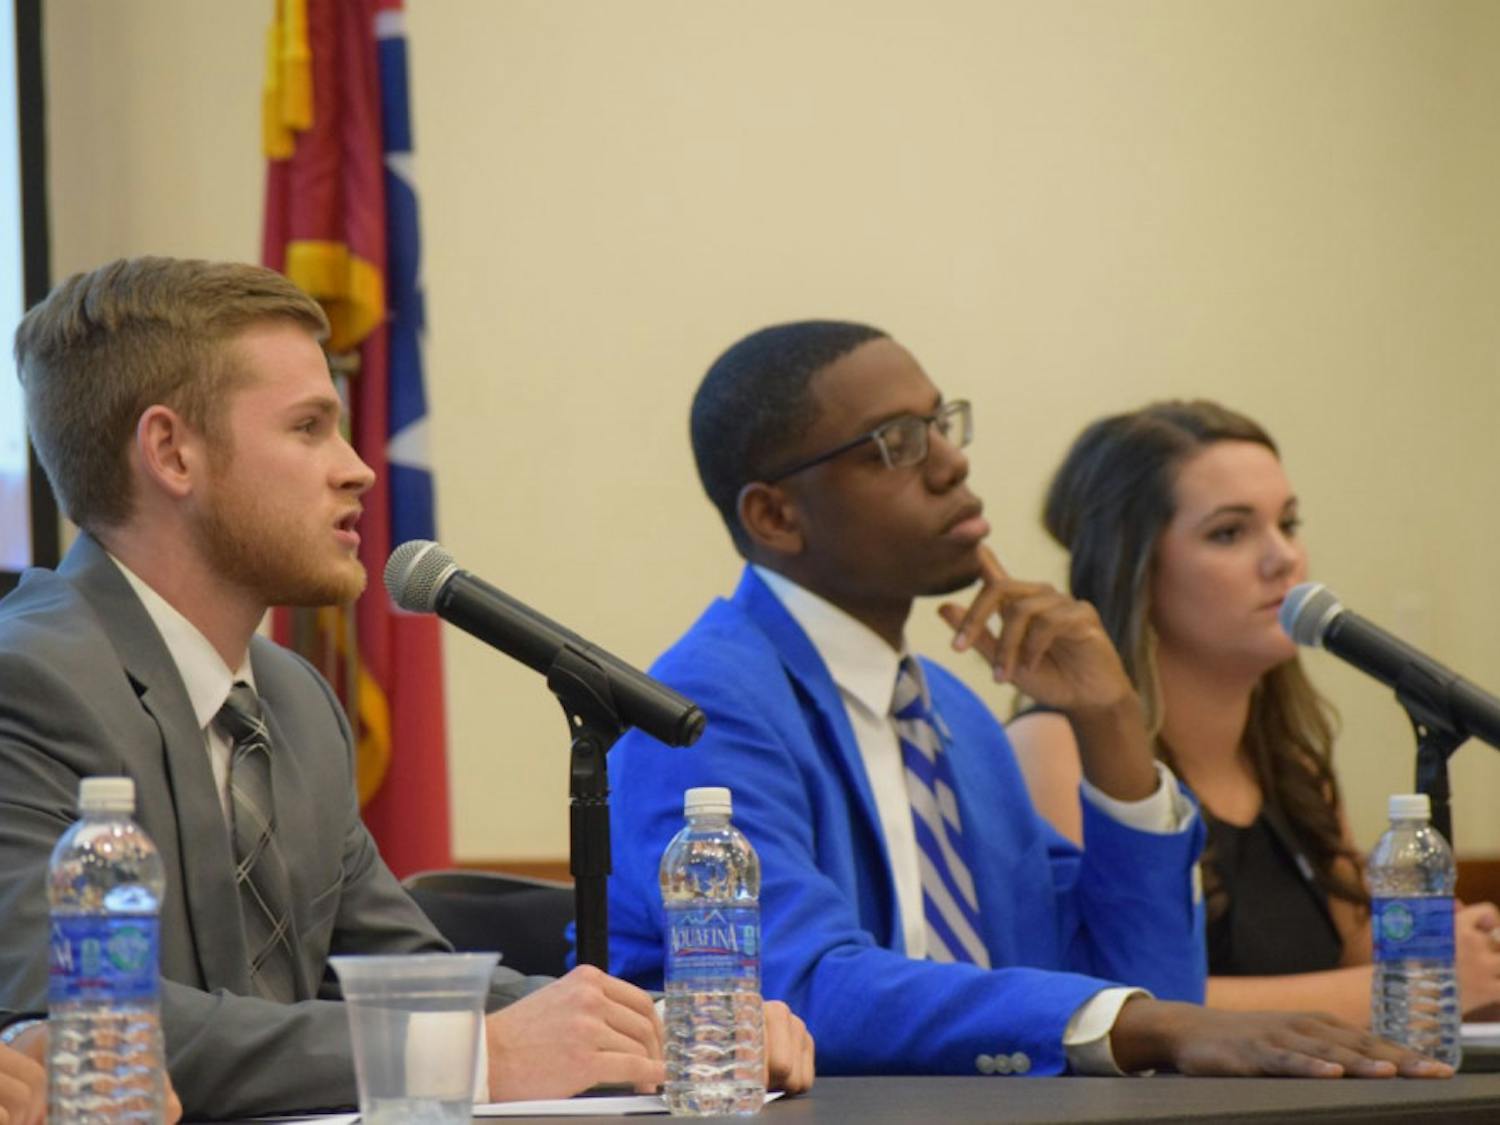 SGA presidential candidates plan for cleaner campaign